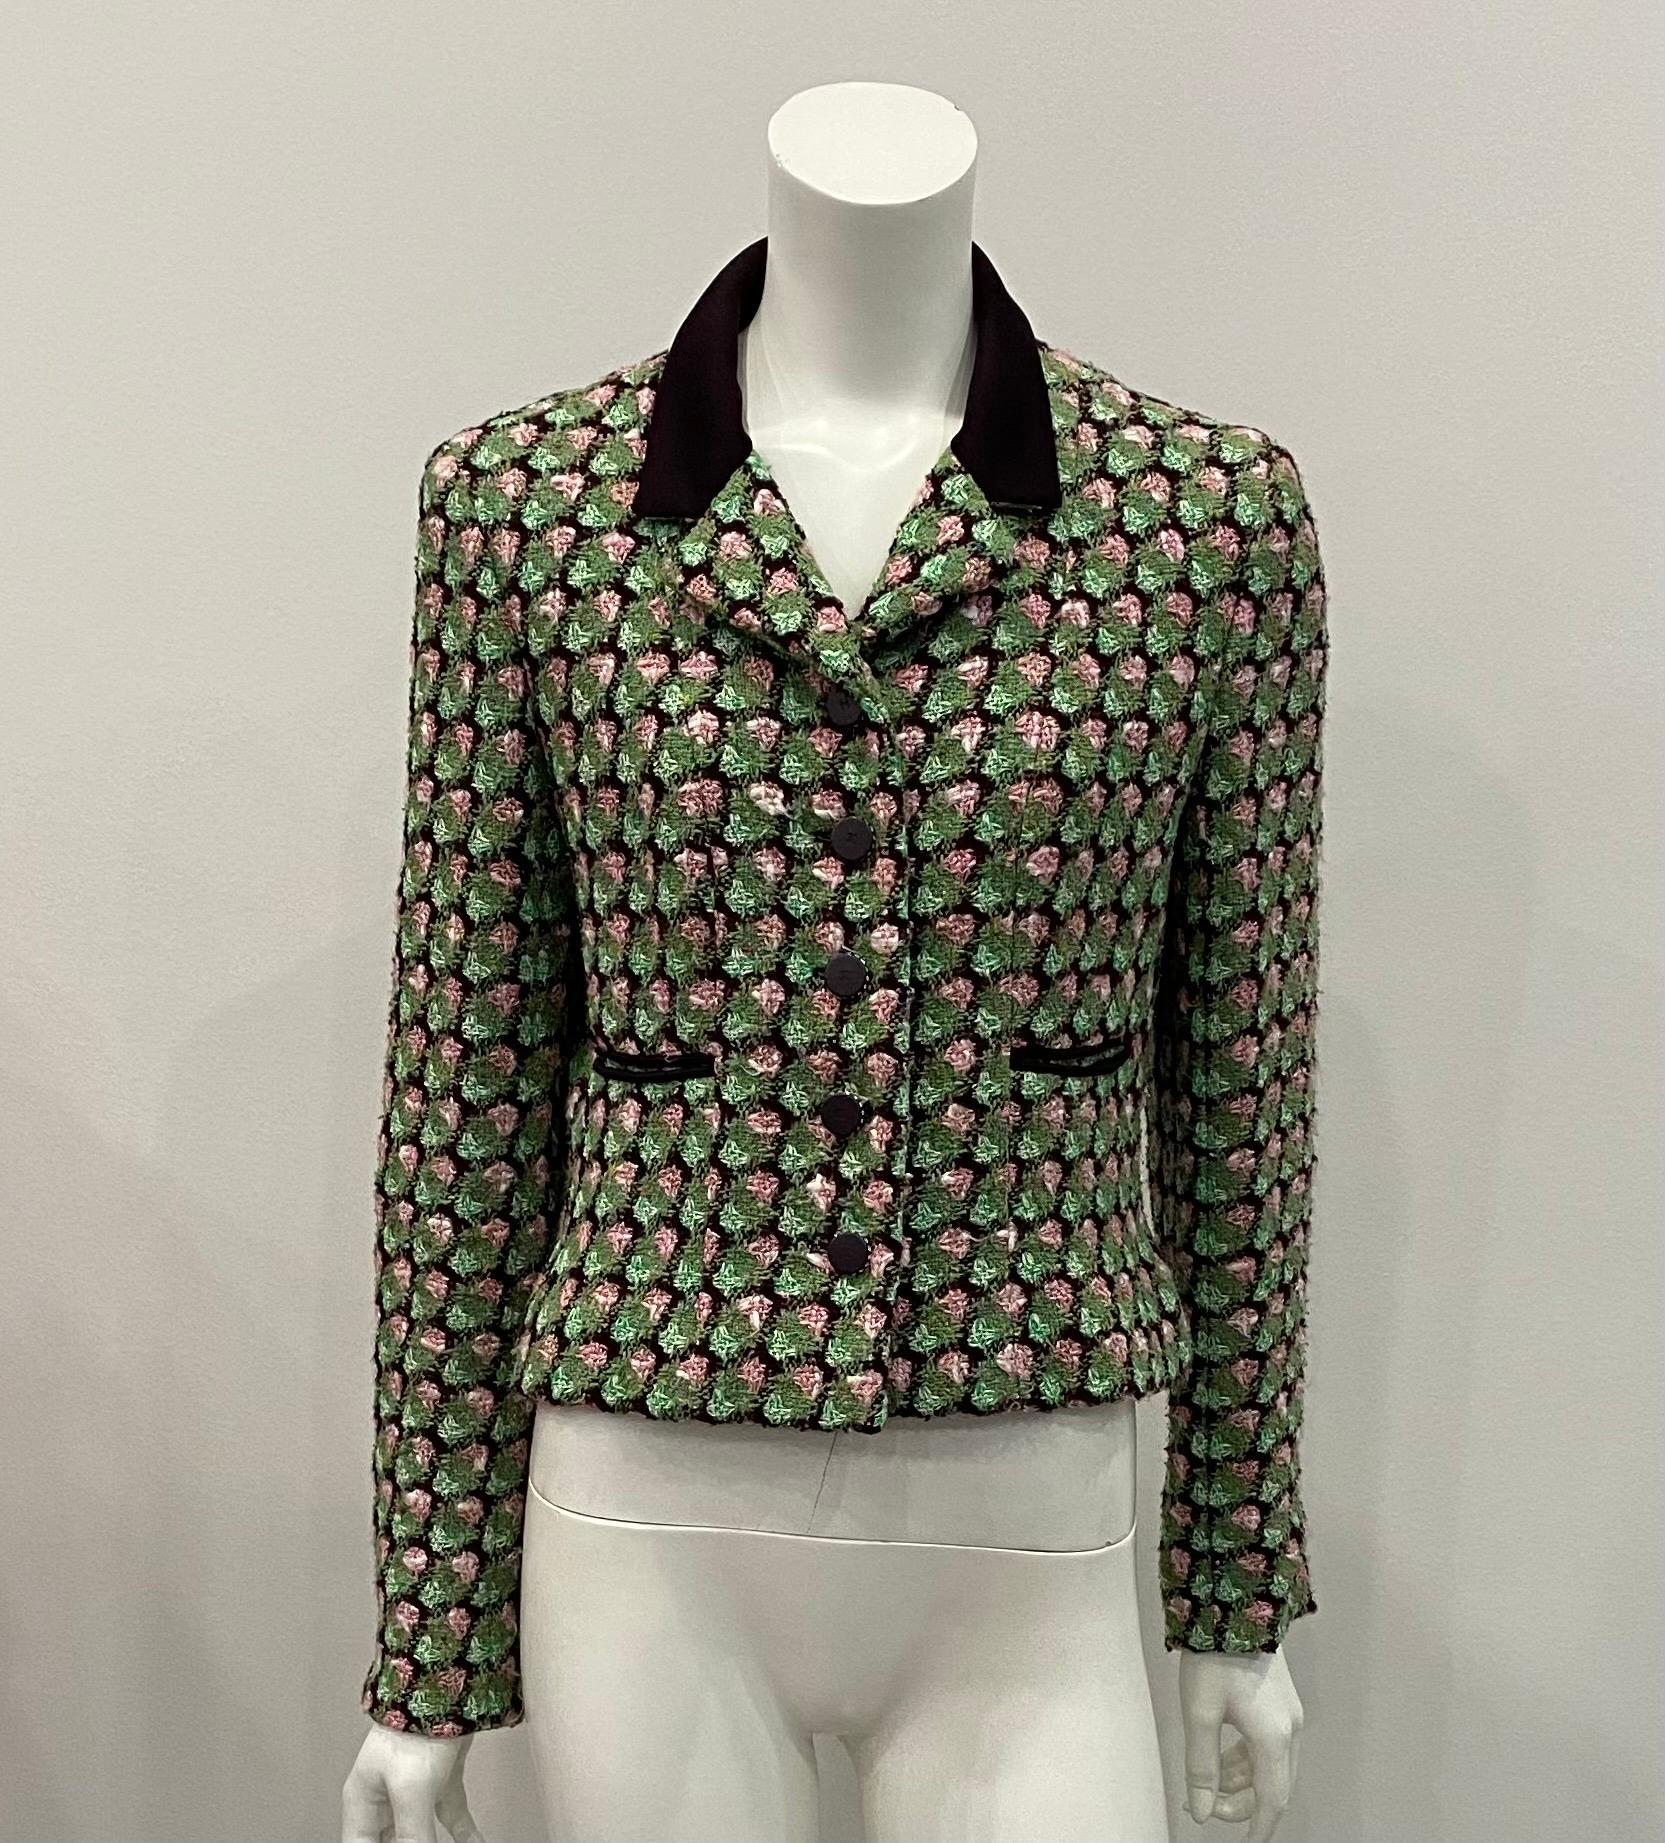 Chanel Green, Pink and Brown Boucle Single Breasted Jacket - Sz 40/42 (Size Tag is missing) This amazing jacket has 5 Brown buttons with a cc and rhinestones all around. Each sleeve also has 1 functional button hole with piping. The jacket has 2